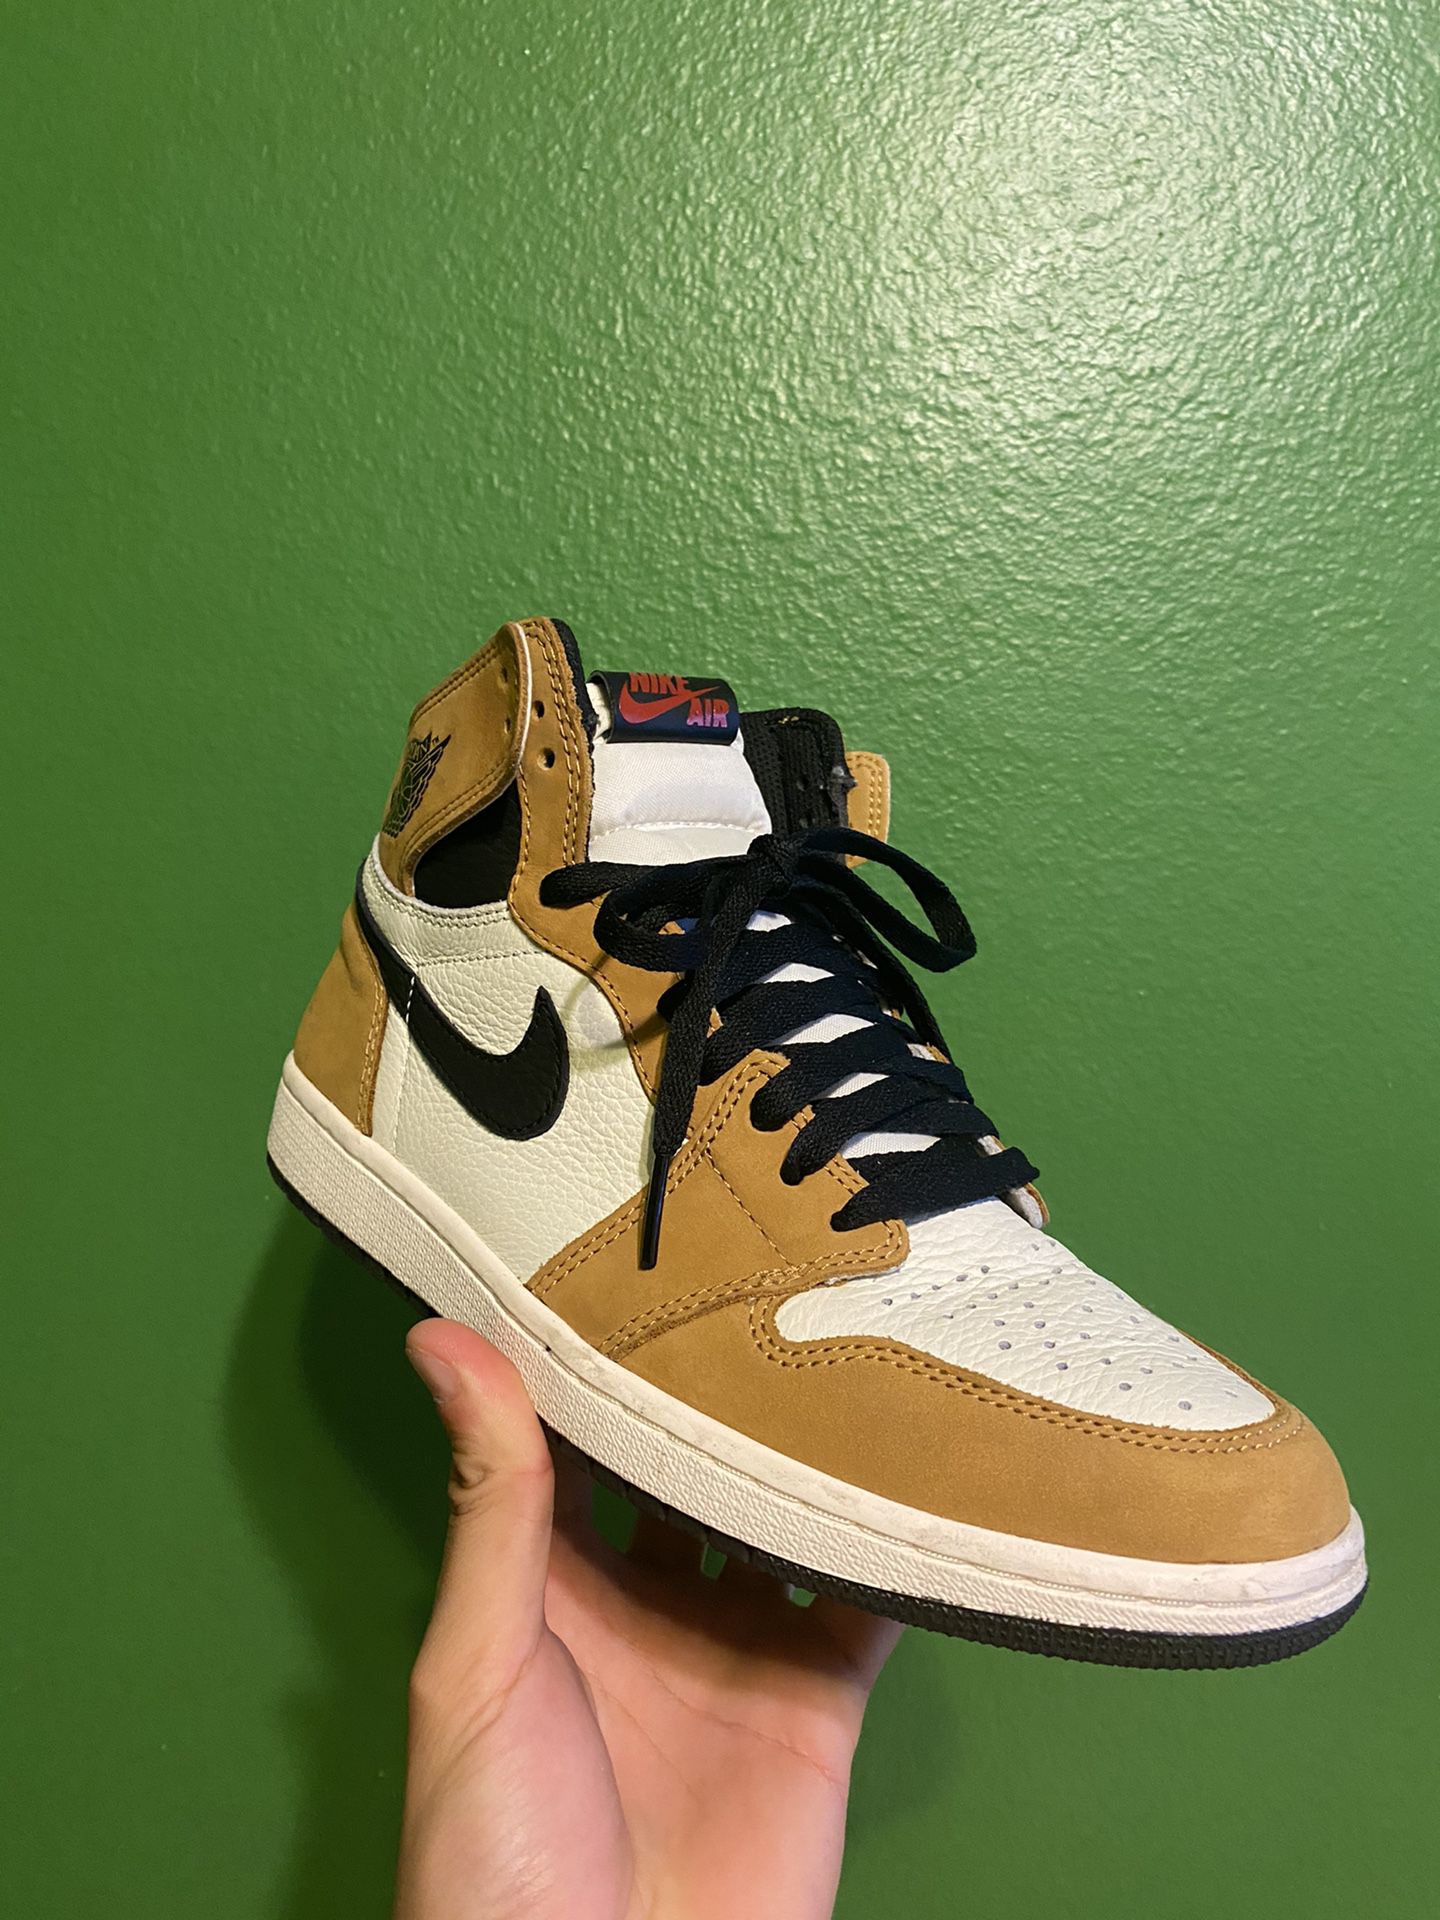 Jordan 1 Rookie of the Year size 8.5